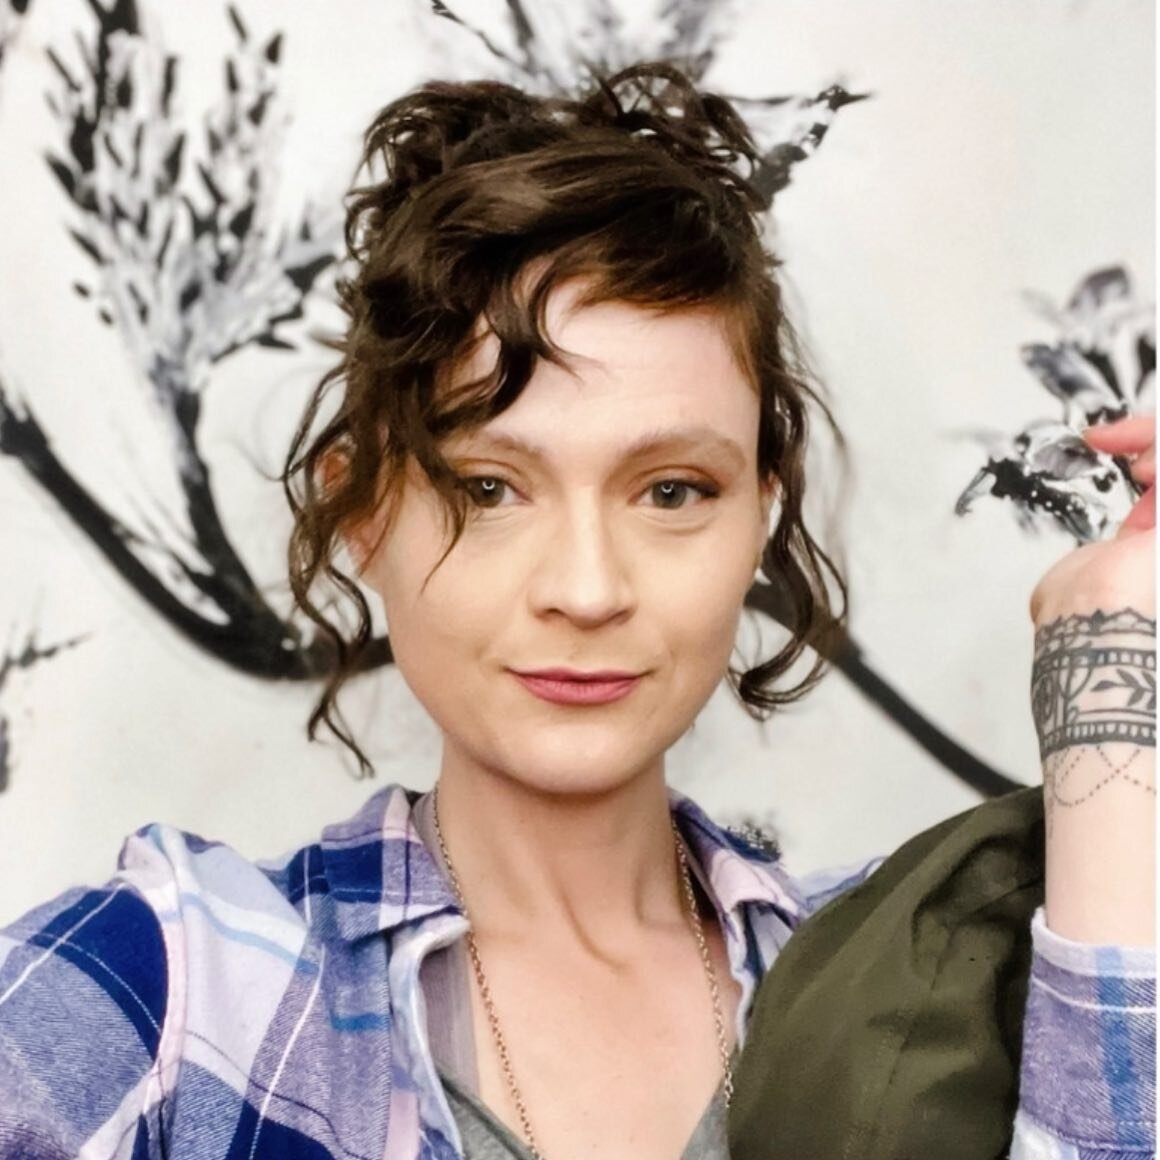 Please welcome our newest stylist to the Crossroads! 
🌟
Sara Brown @every_flower is bringing her 13 years of experience behind the chair to Lumine on March 31st. 
Sara specializes in short edgy cuts to curls, and soft natural color pops. Sara has al